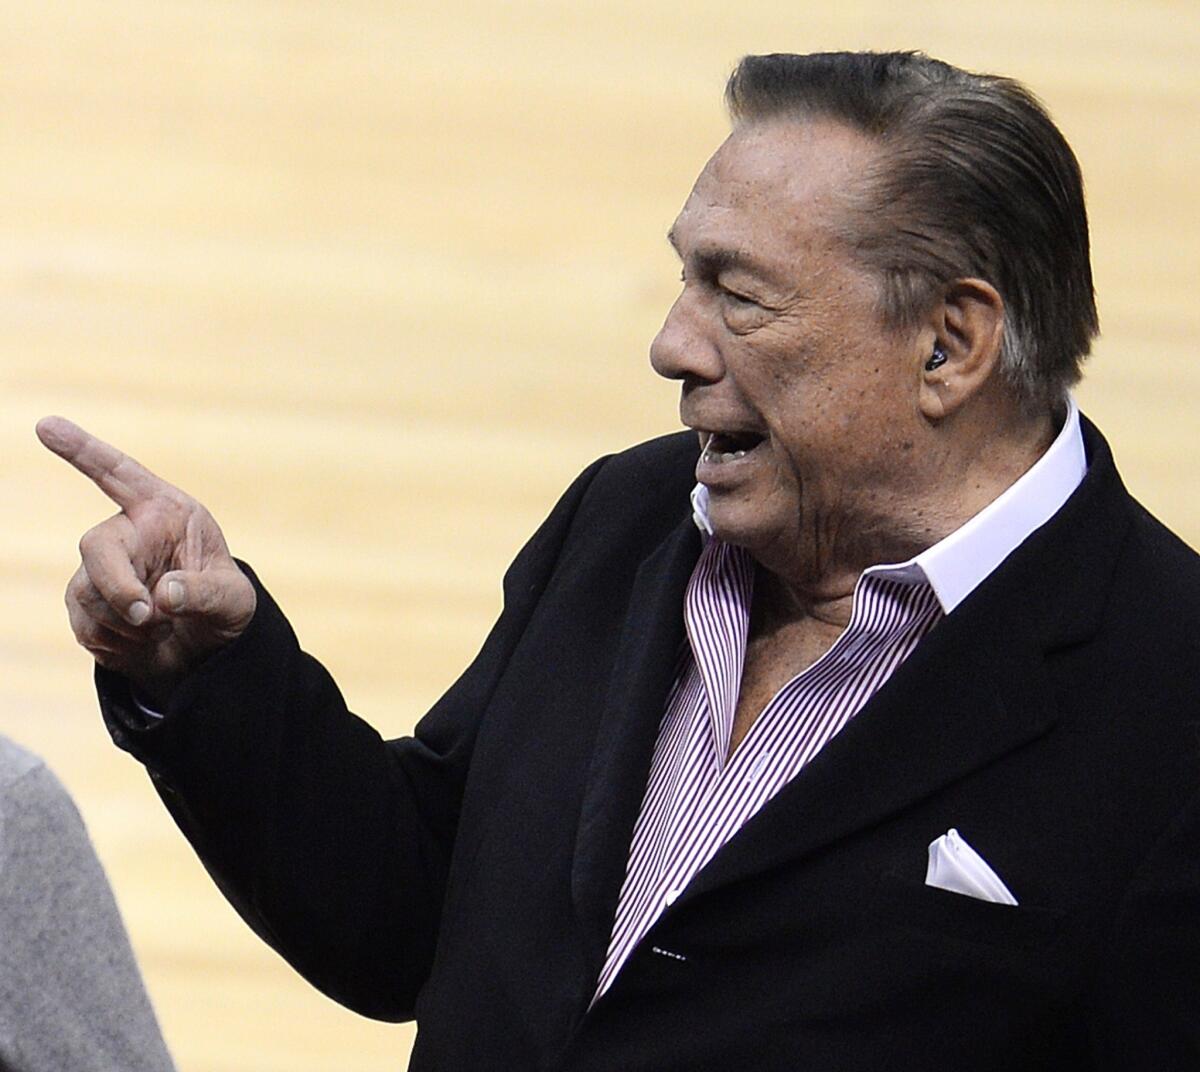 The voice of Los Angeles Clippers owner Donald Sterling is said to be heard on two new tapes. Here, he attends the NBA playoff game between the Clippers and the Golden State Warriors on April 21 at Staples Center.